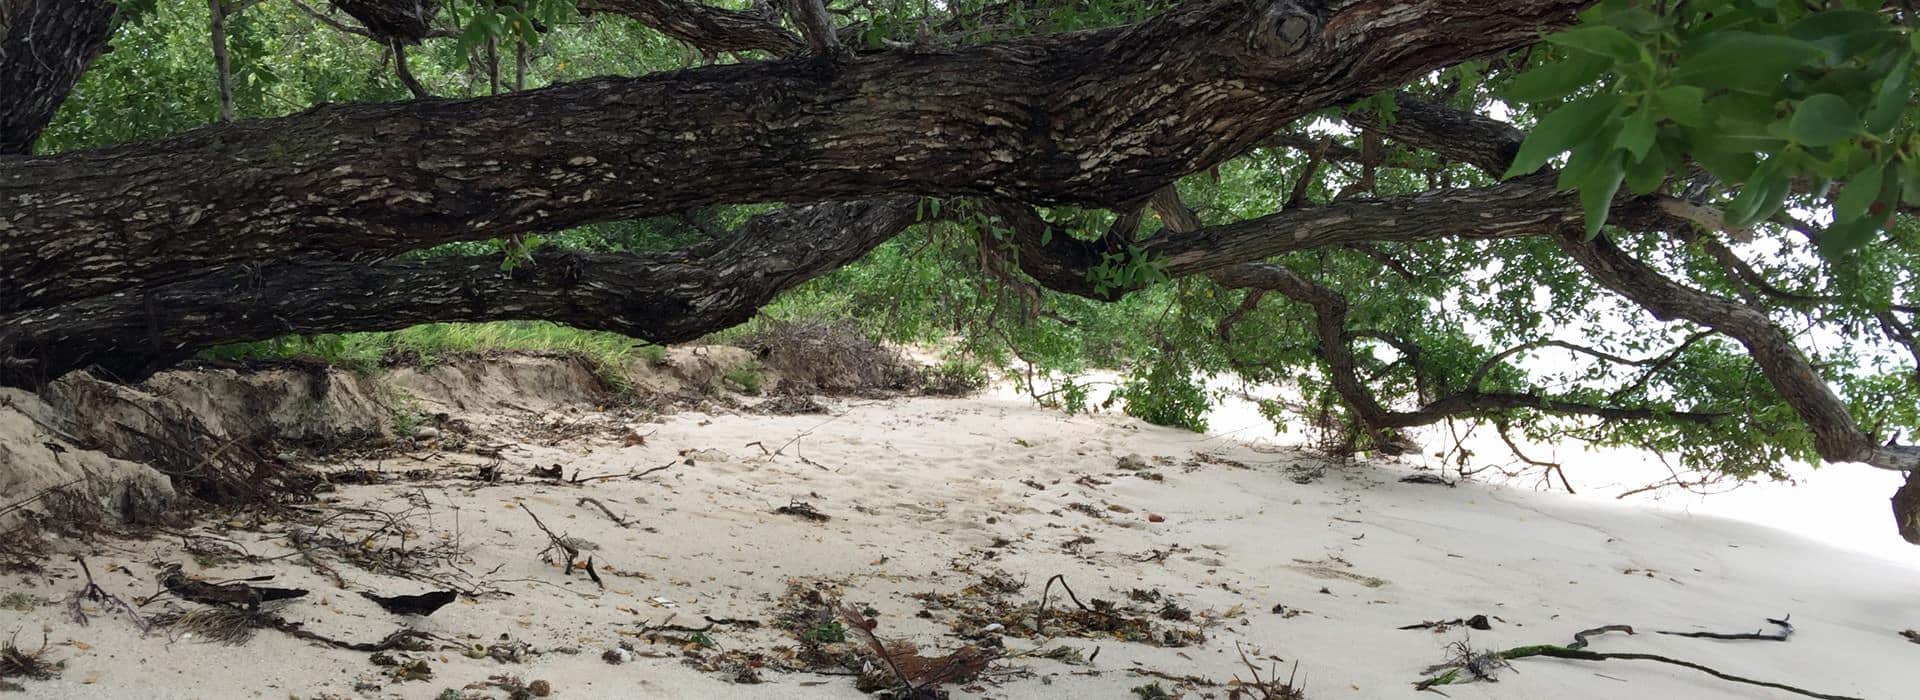 Large tree branch with green leaves laying horizontally over white sandy beach